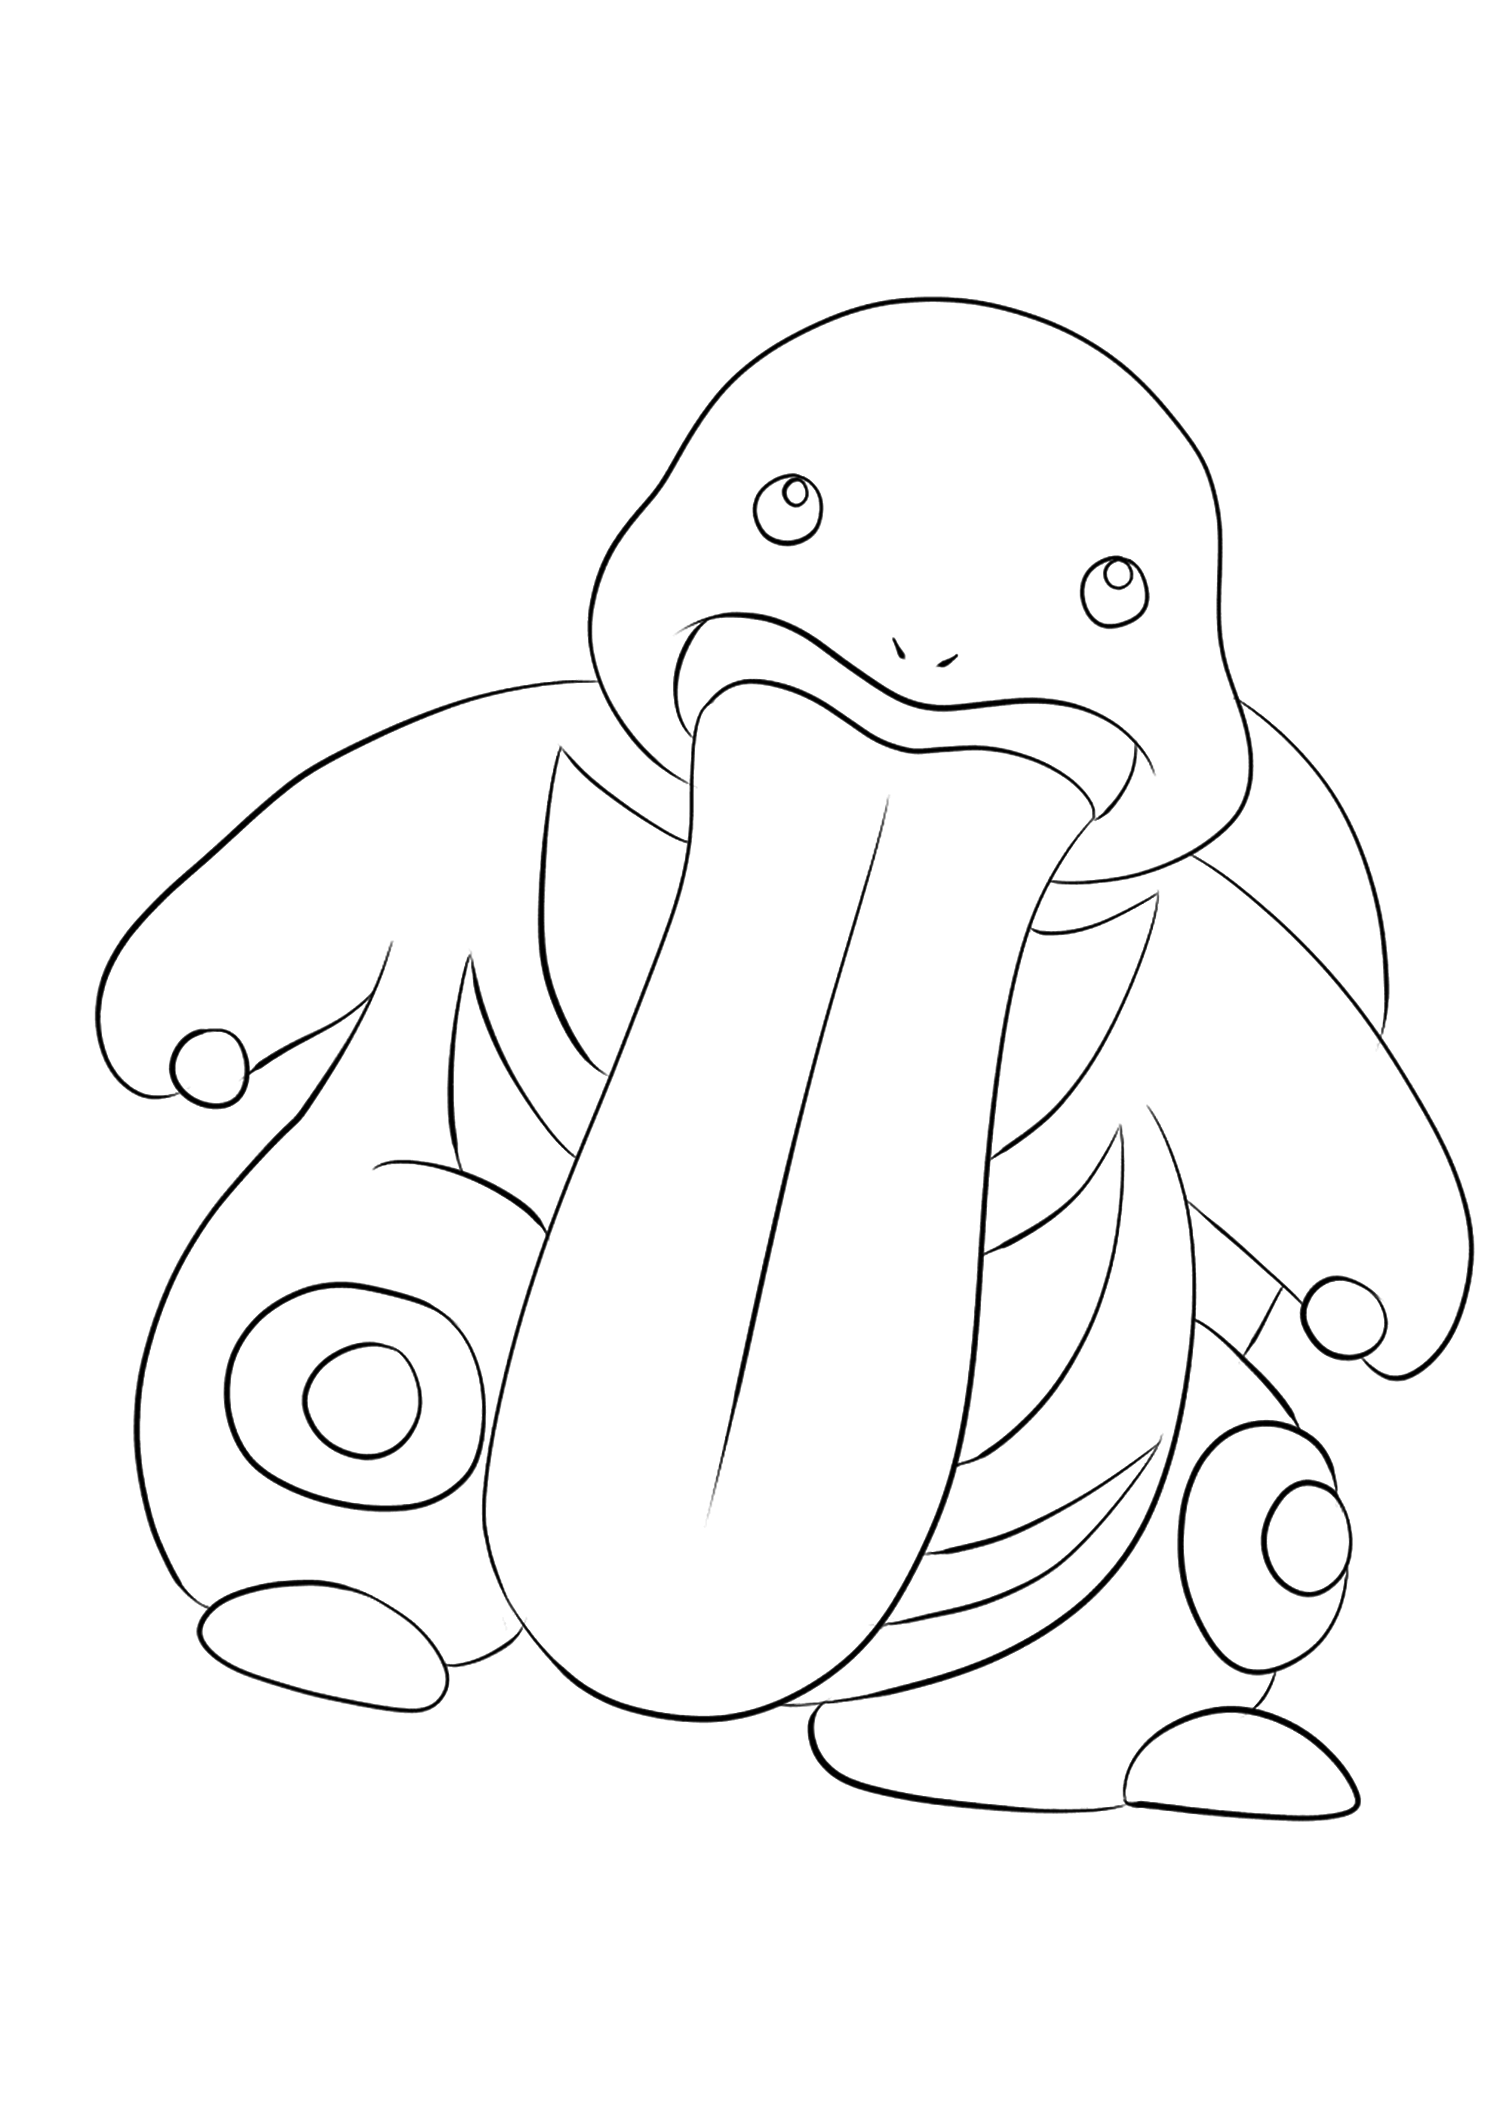 Lickitung (No.108). Lickitung Coloring page, Generation I Pokemon of type NormalOriginal image credit: Pokemon linearts by Lilly Gerbil on Deviantart.Permission:  All rights reserved © Pokemon company and Ken Sugimori.